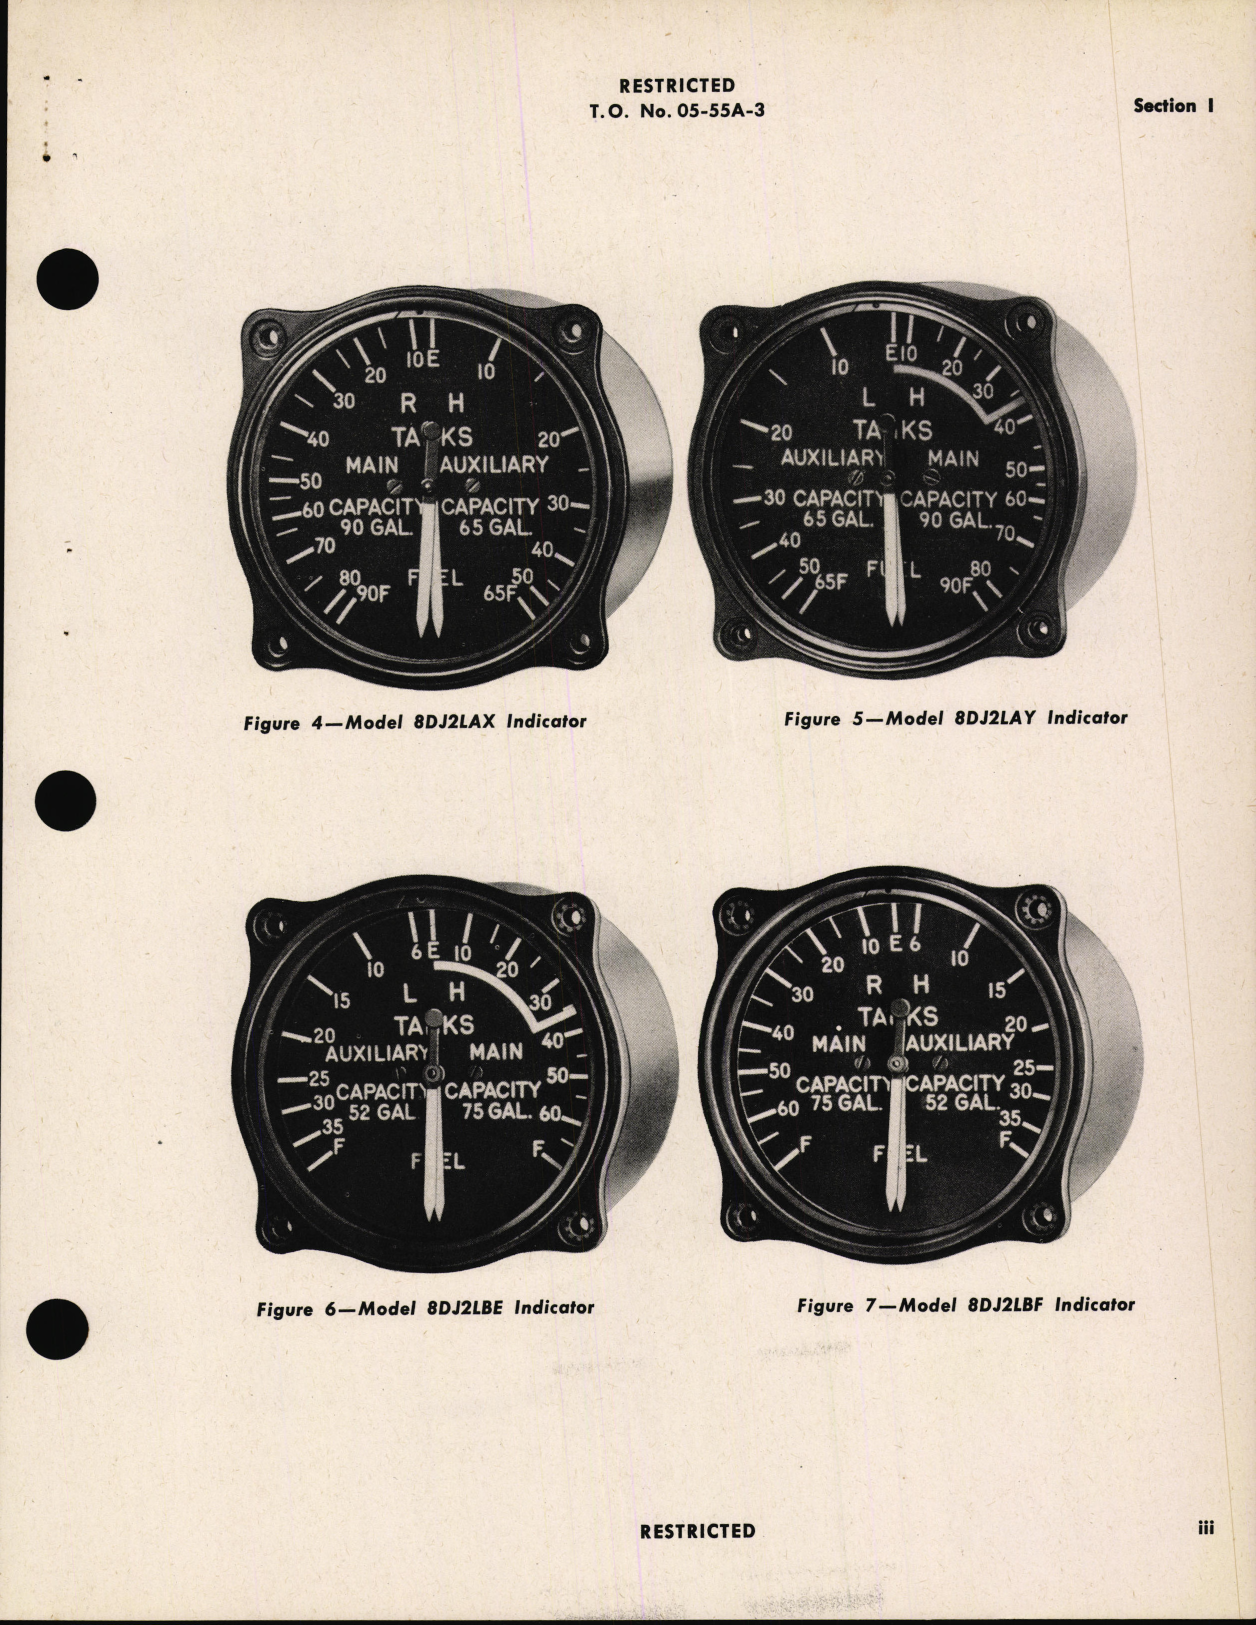 Sample page 5 from AirCorps Library document: Handbook of Instructions with Parts Catalog for D-C Selsyn Fuel Level Gages